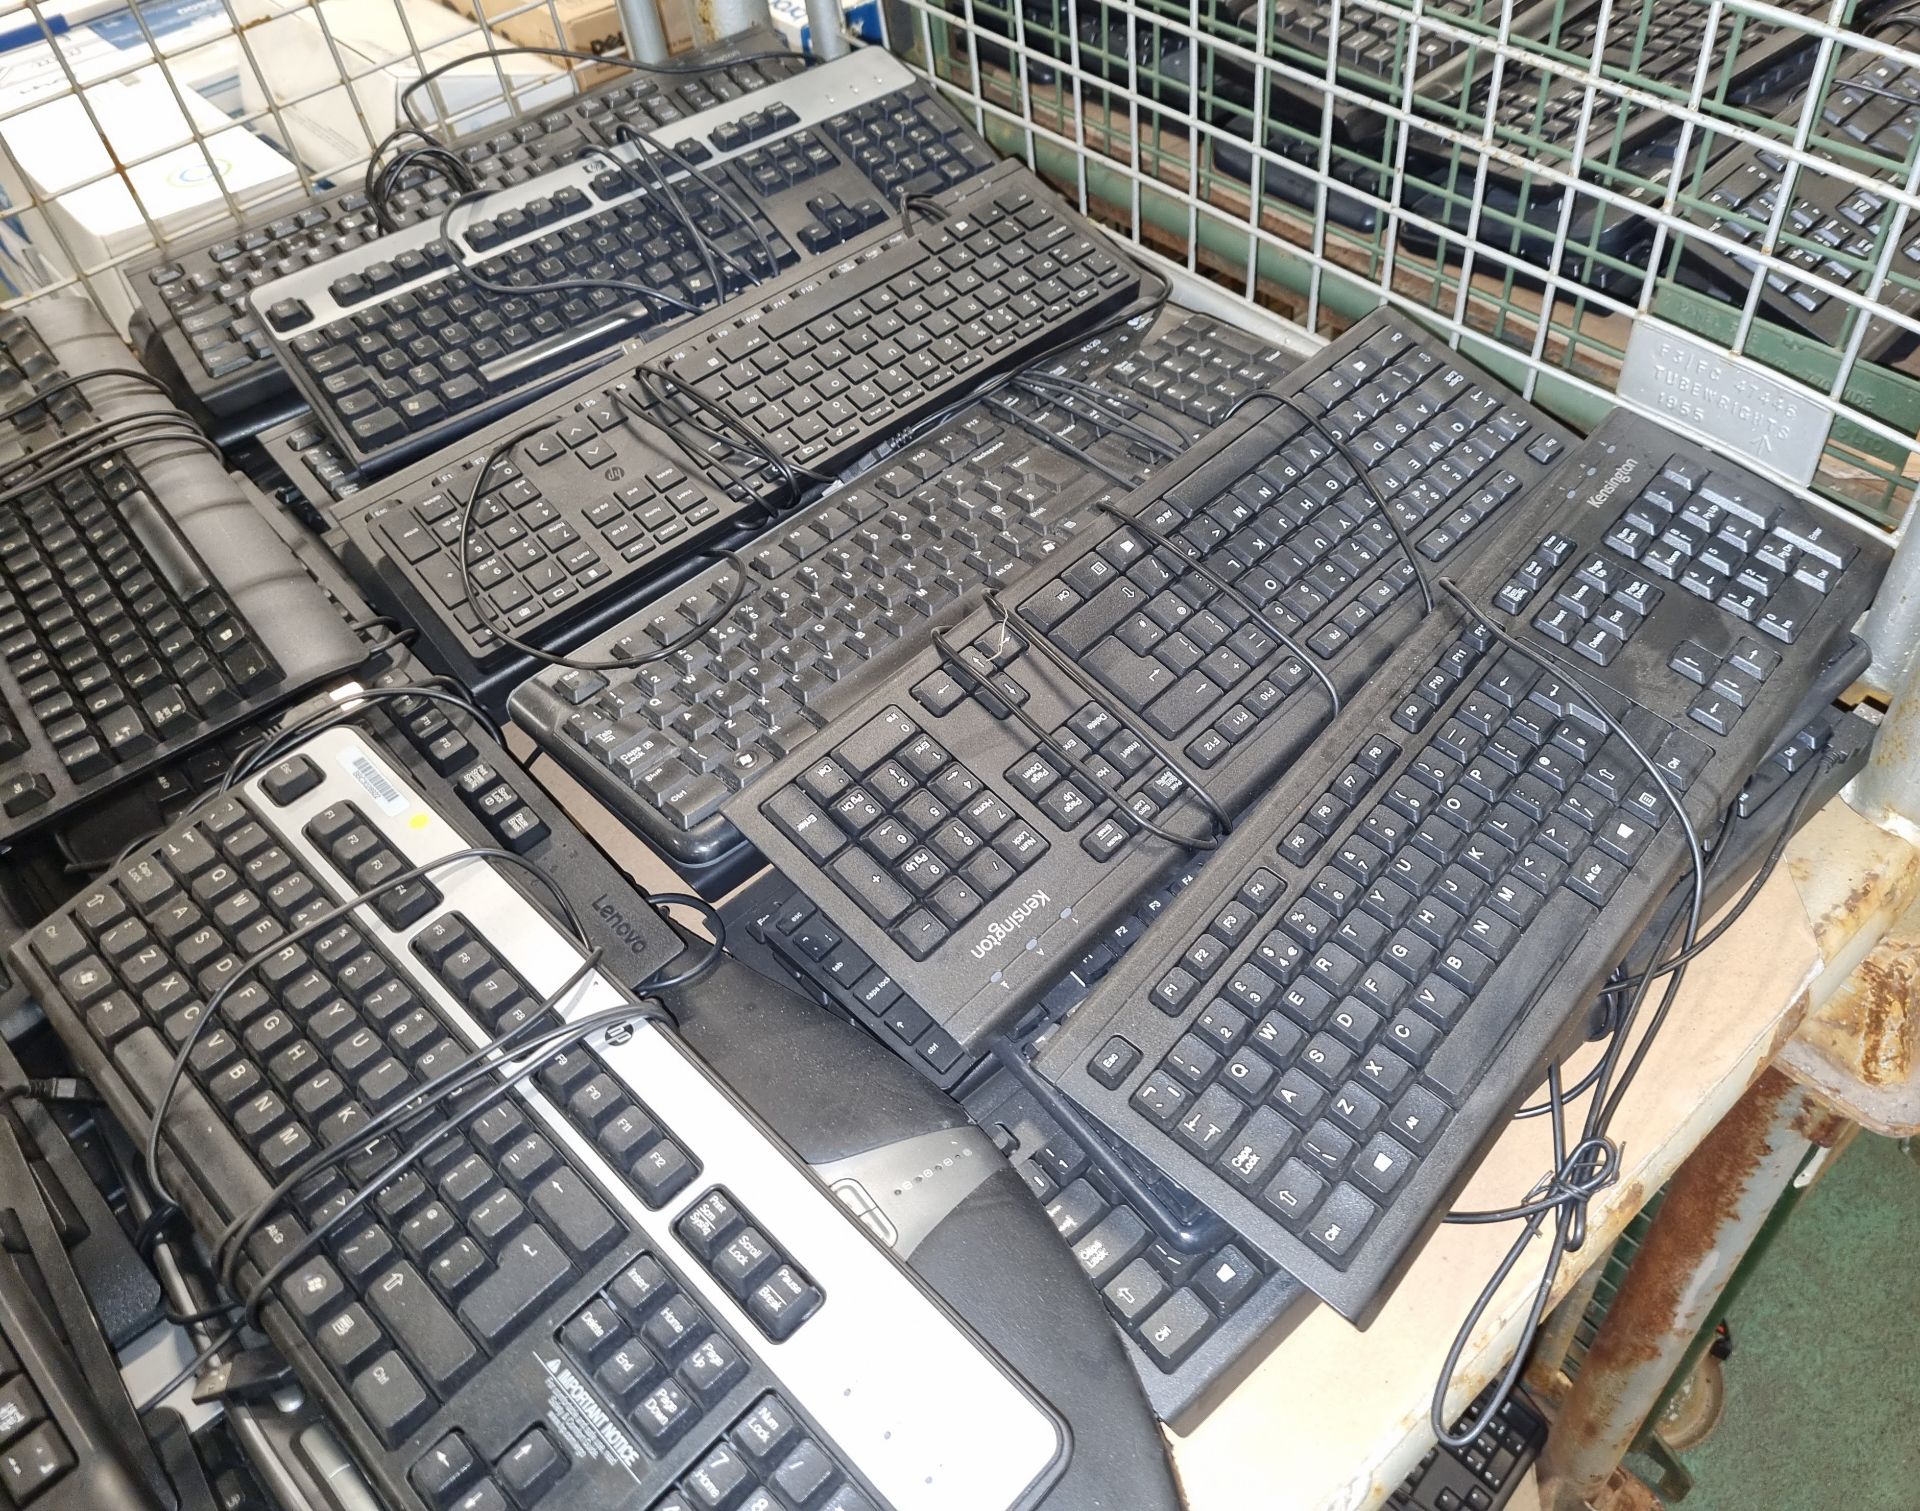 90x computer keyboards of multiple makes - HP, Logitech and Kensington - Image 3 of 5